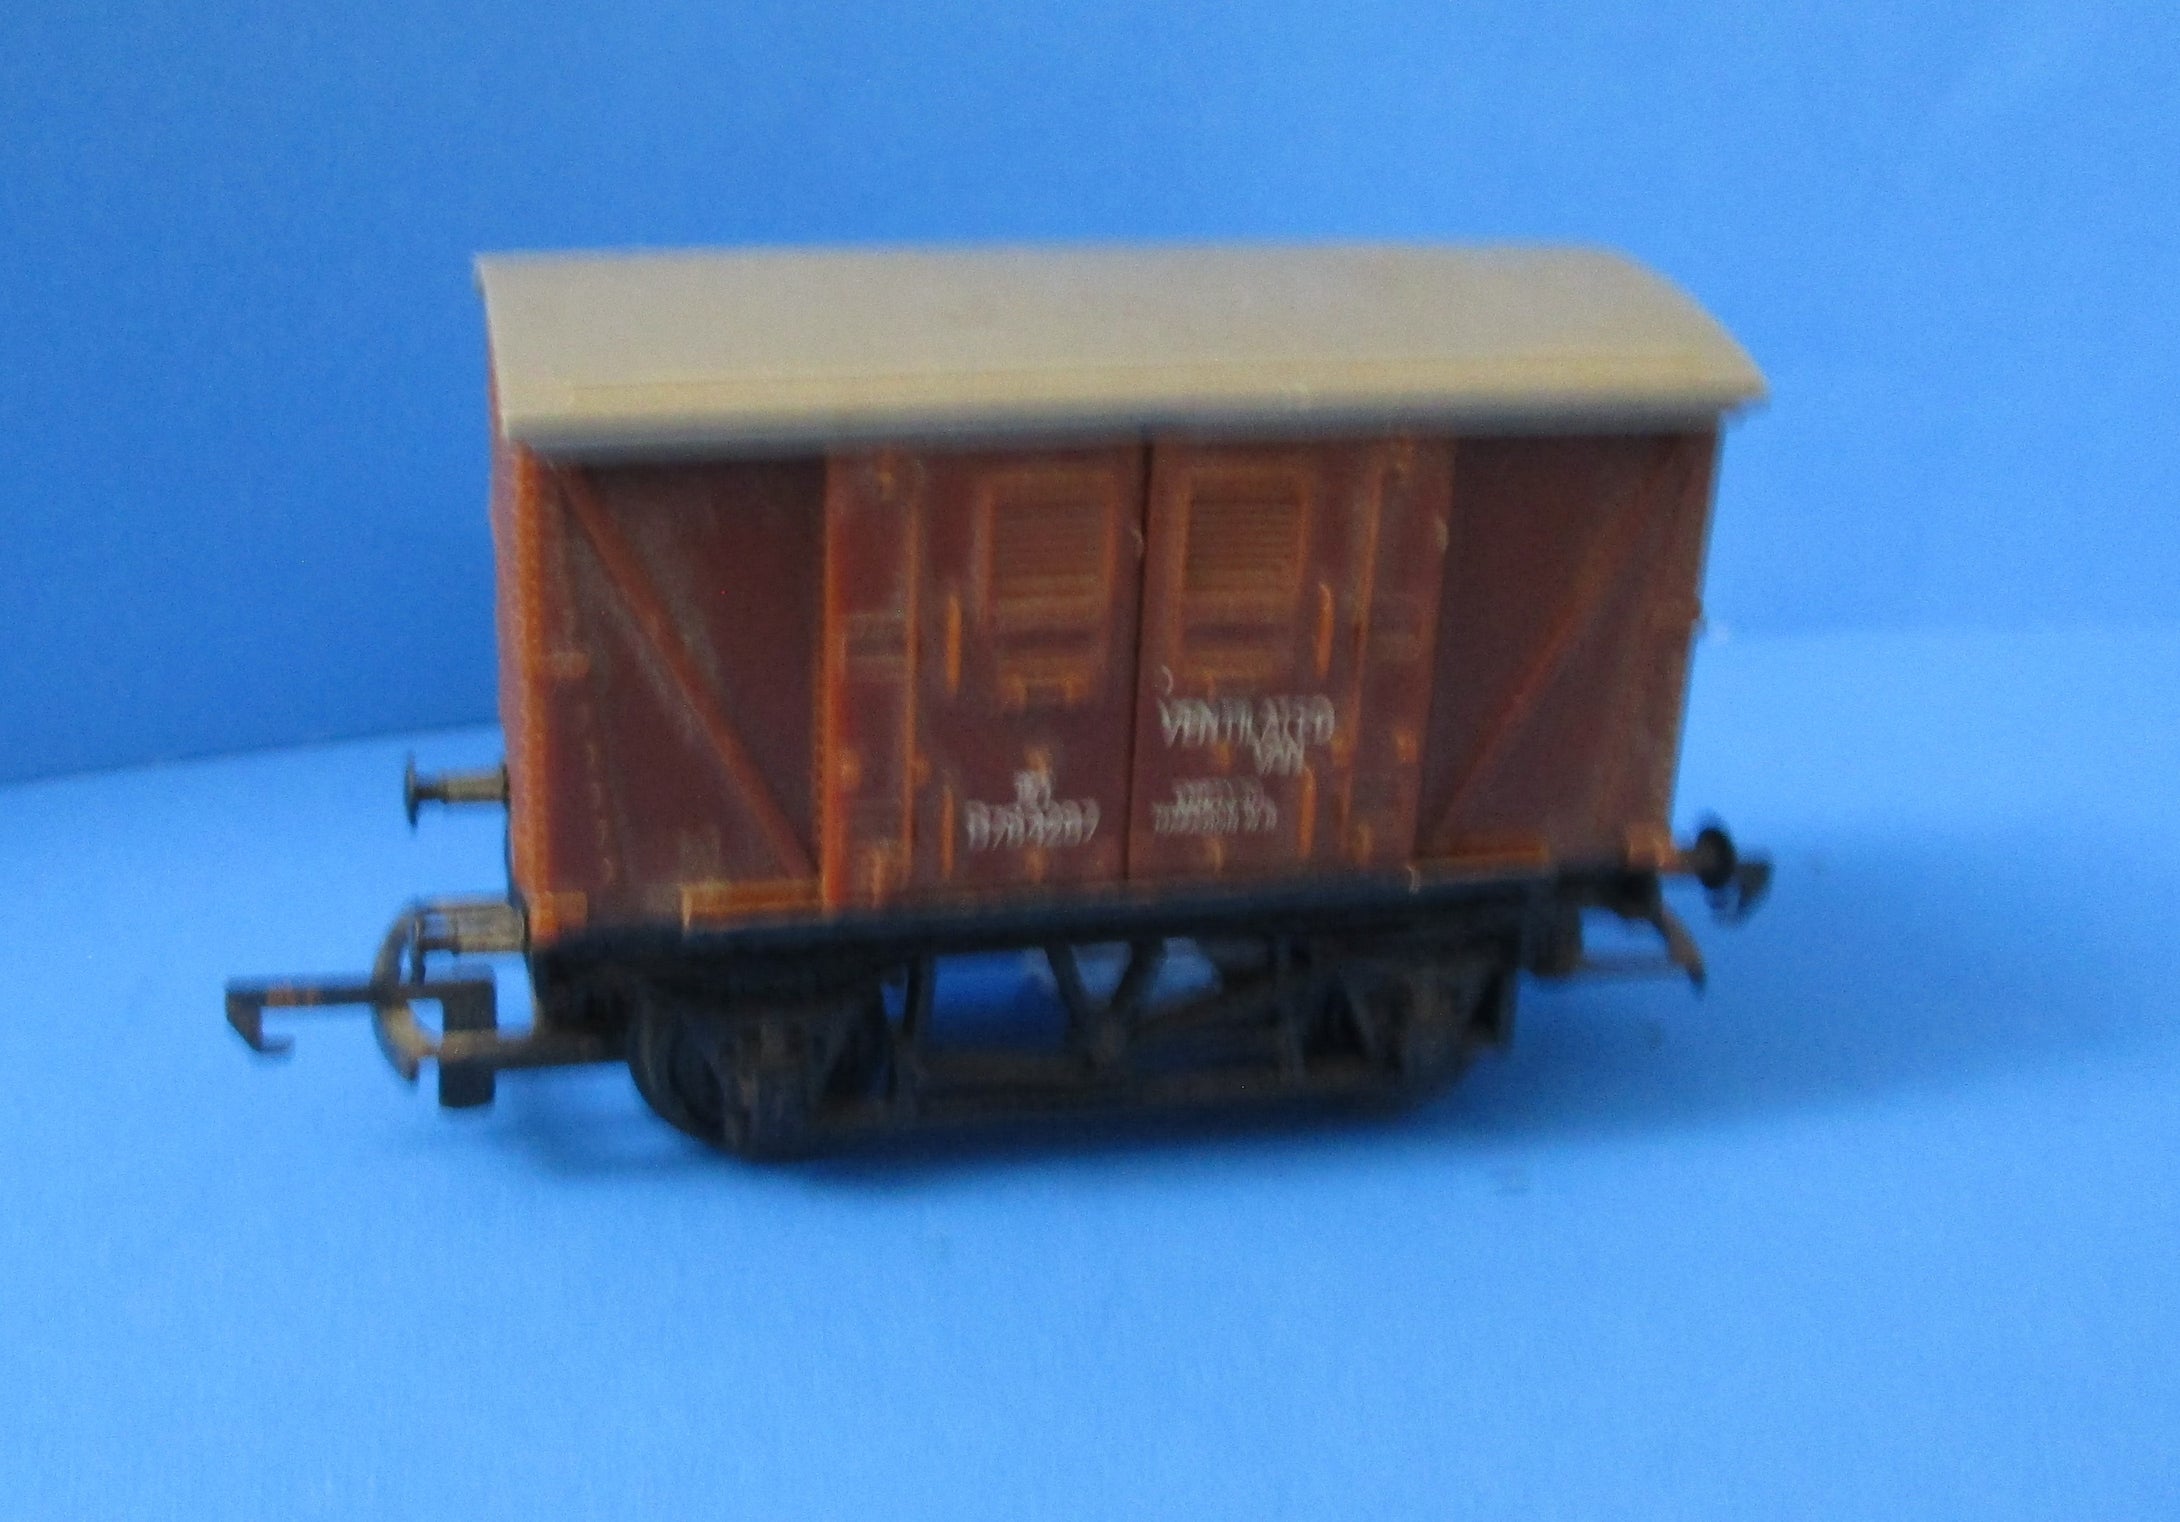 R205 HORNBY BR Ventilated Van with Opening Doors B784287 - UNBOXED